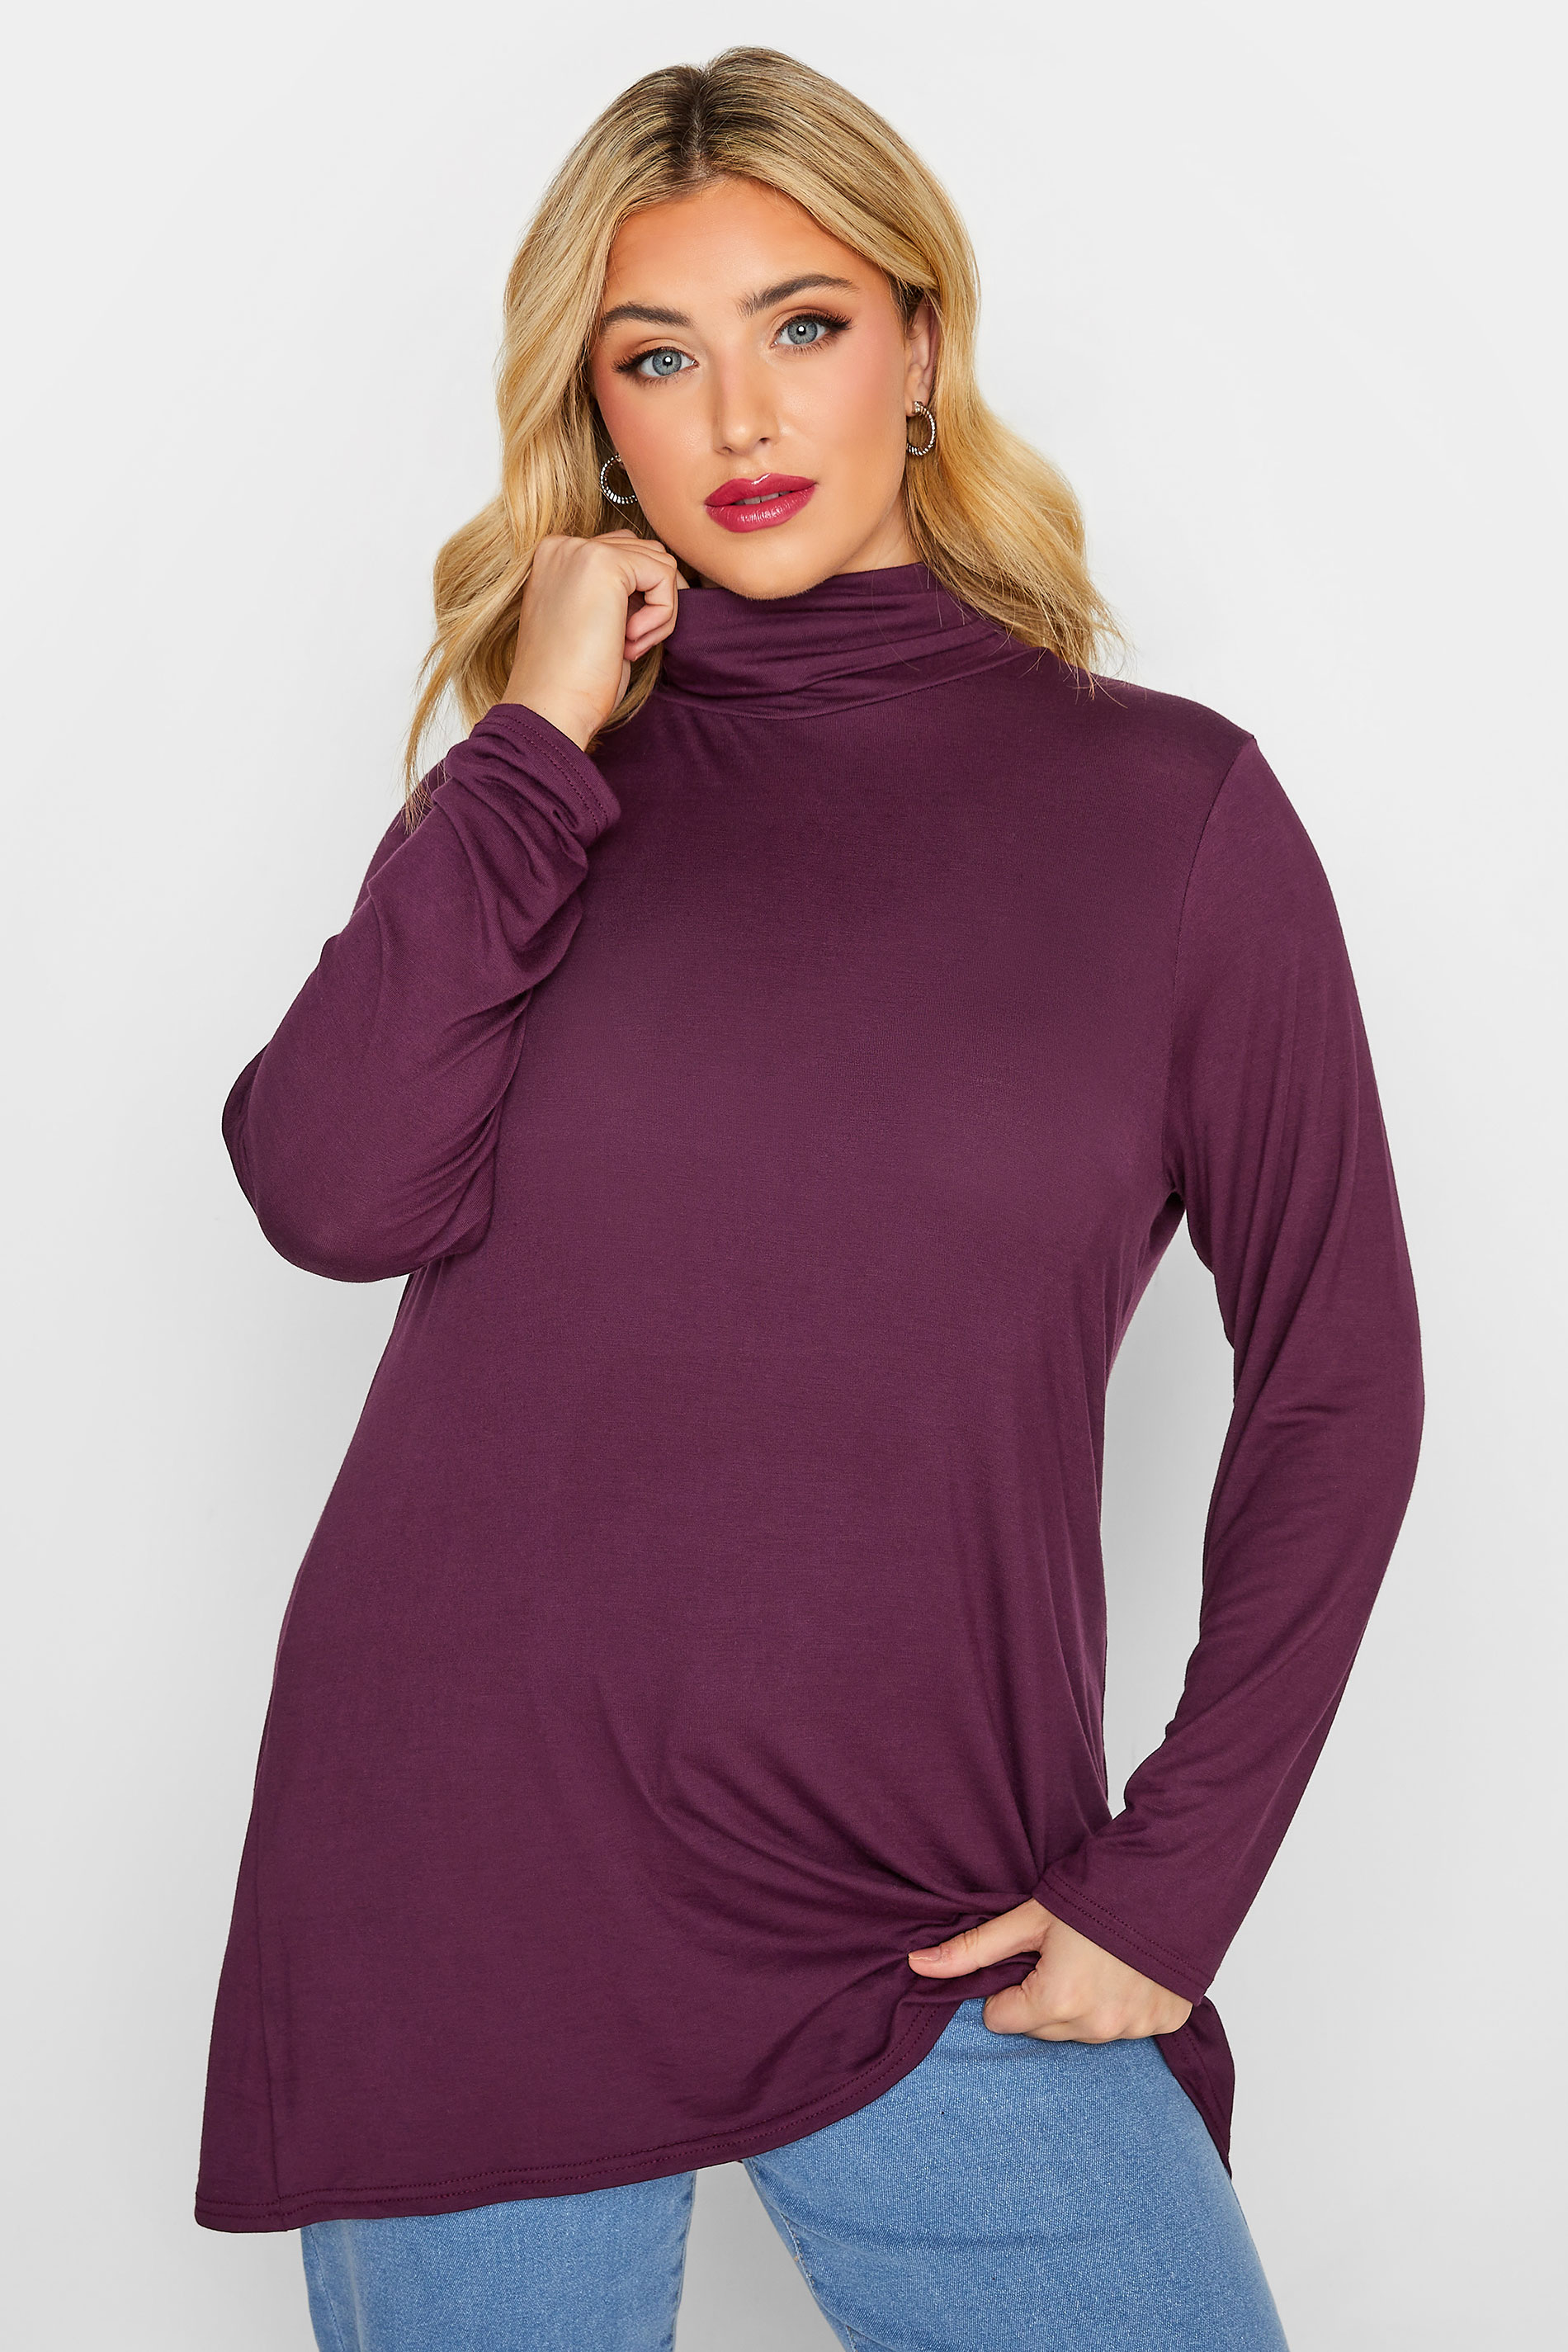 LIMITED COLLECTION Plus Size Berry Purple Turtle Neck Top | Yours Clothing 1